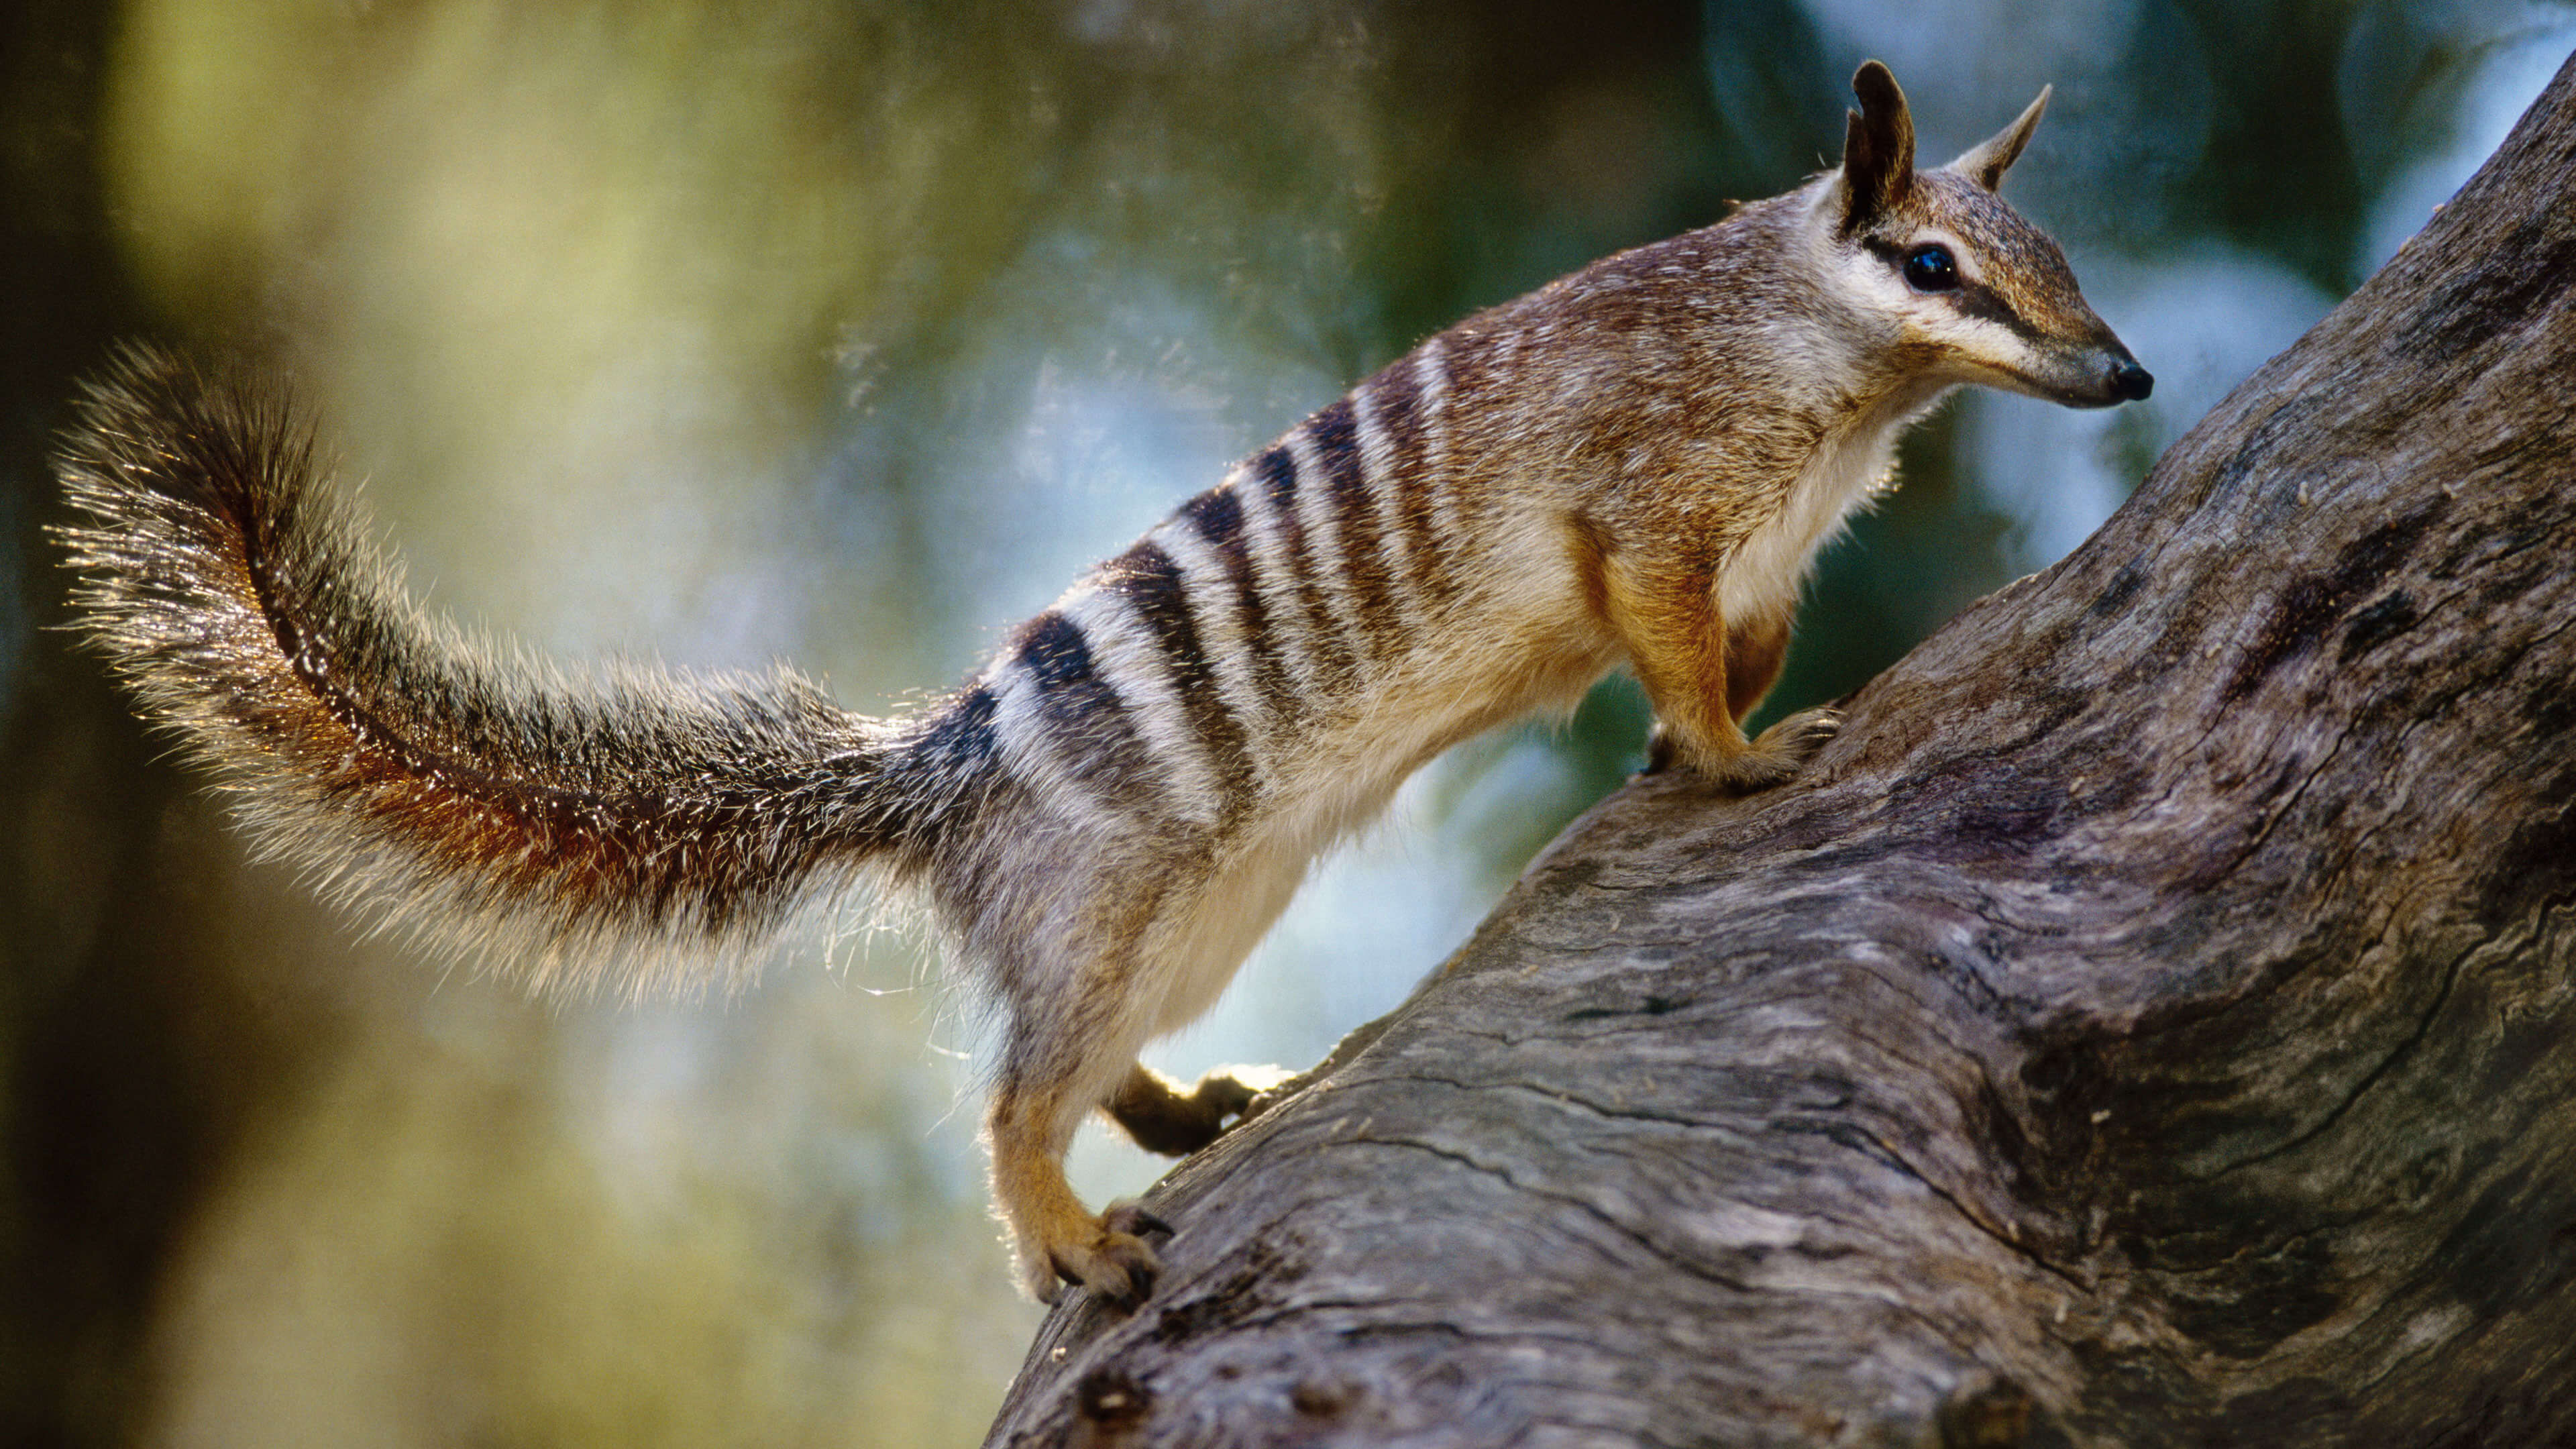 Going nuts for numbats